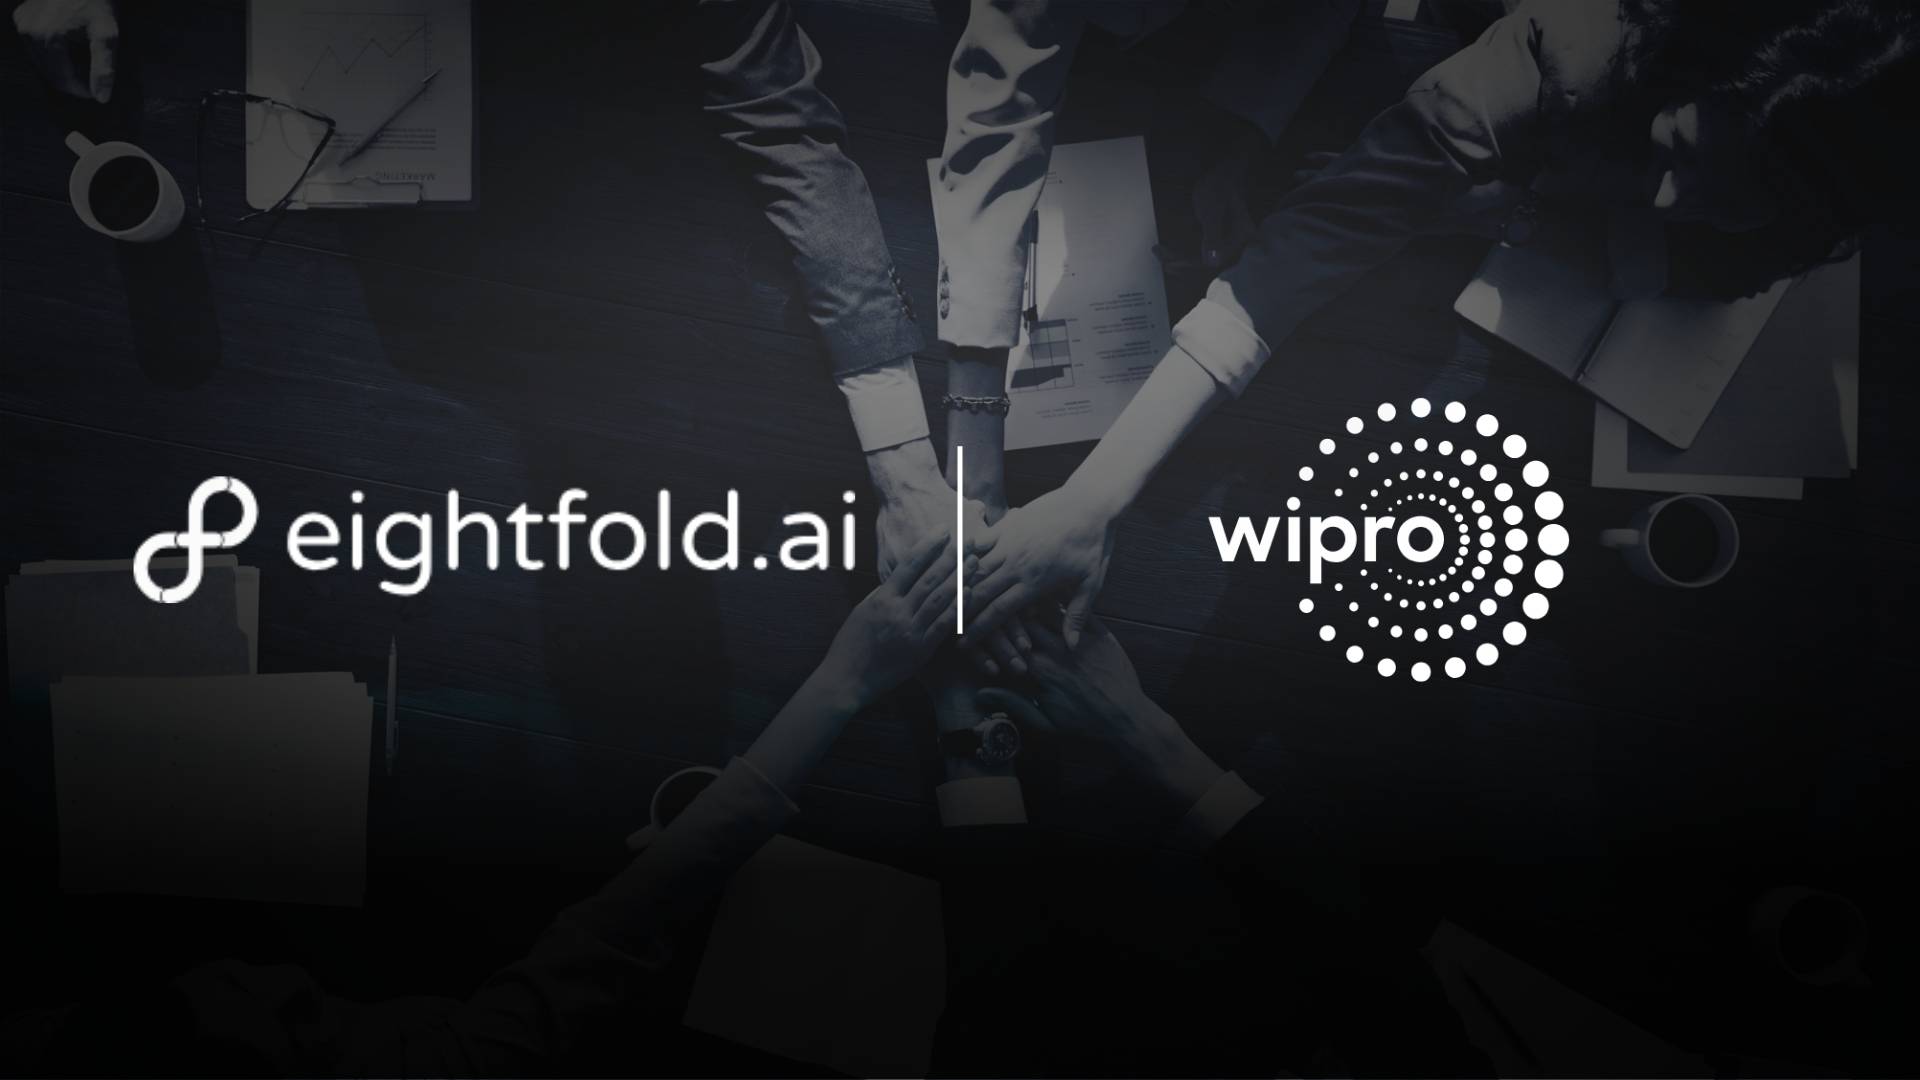 Wipro Partners with Eightfold AI to Revolutionize Talent Management and Skill Development